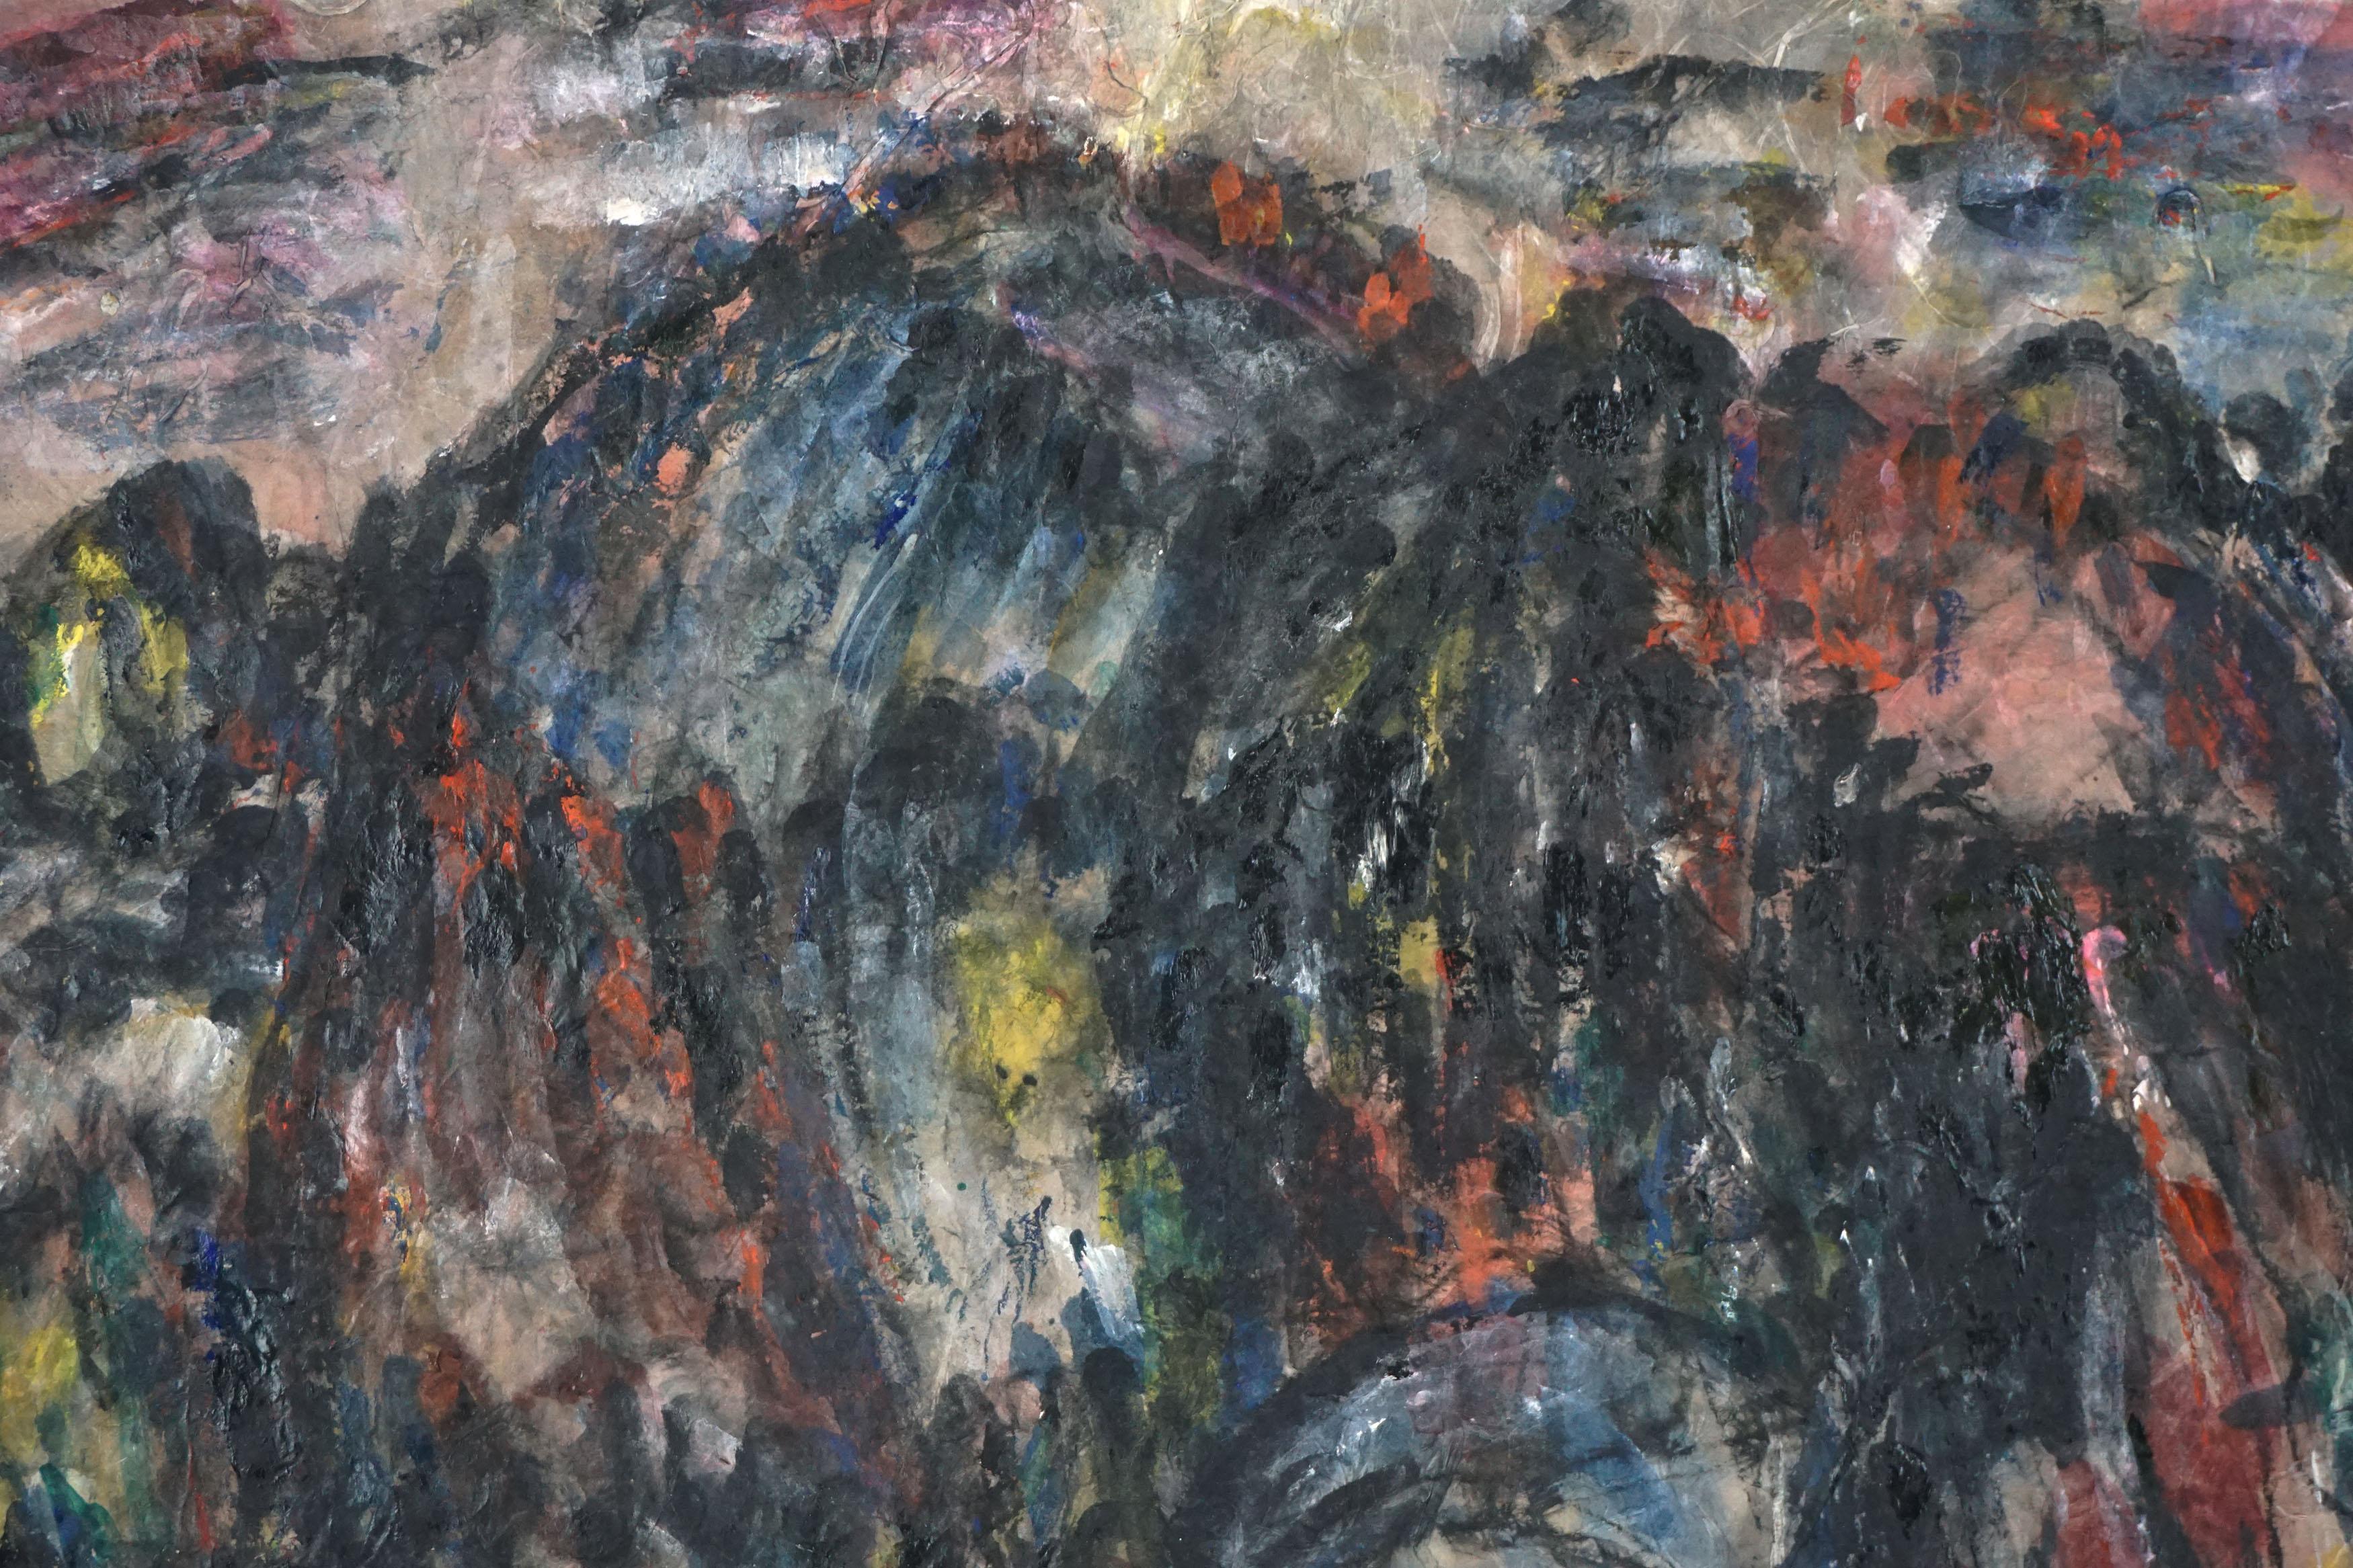 Mid Century Abstract Expressionist Painting of Yosemite's Half Dome

1950's abstract expressionist painting of Yosemite's iconic Half Dome by San Francisco artist Honora Berg (American, 1897-1985). Stark and haunting, the  Half Dome from the